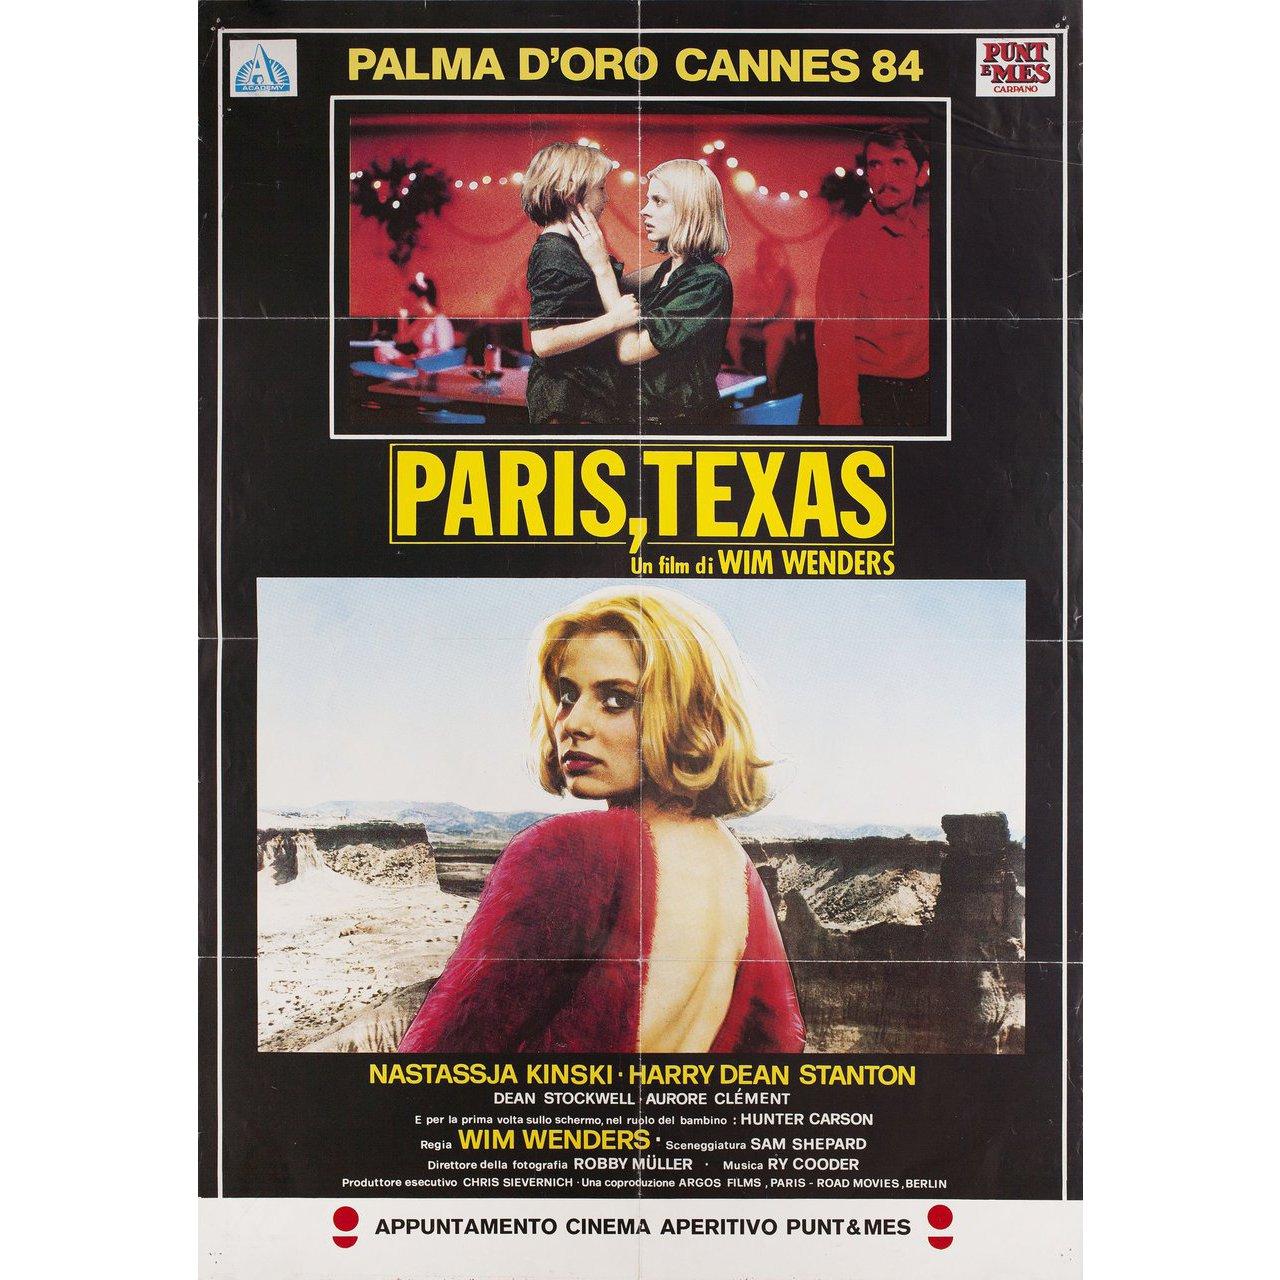 Original 1984 Italian double fotobusta poster for the film Paris, Texas directed by Wim Wenders with Nastassja Kinski / Harry Dean Stanton / Sam Berry / Bernhard Wicki / Dean Stockwell. Very Good condition, folded. Many original posters were issued